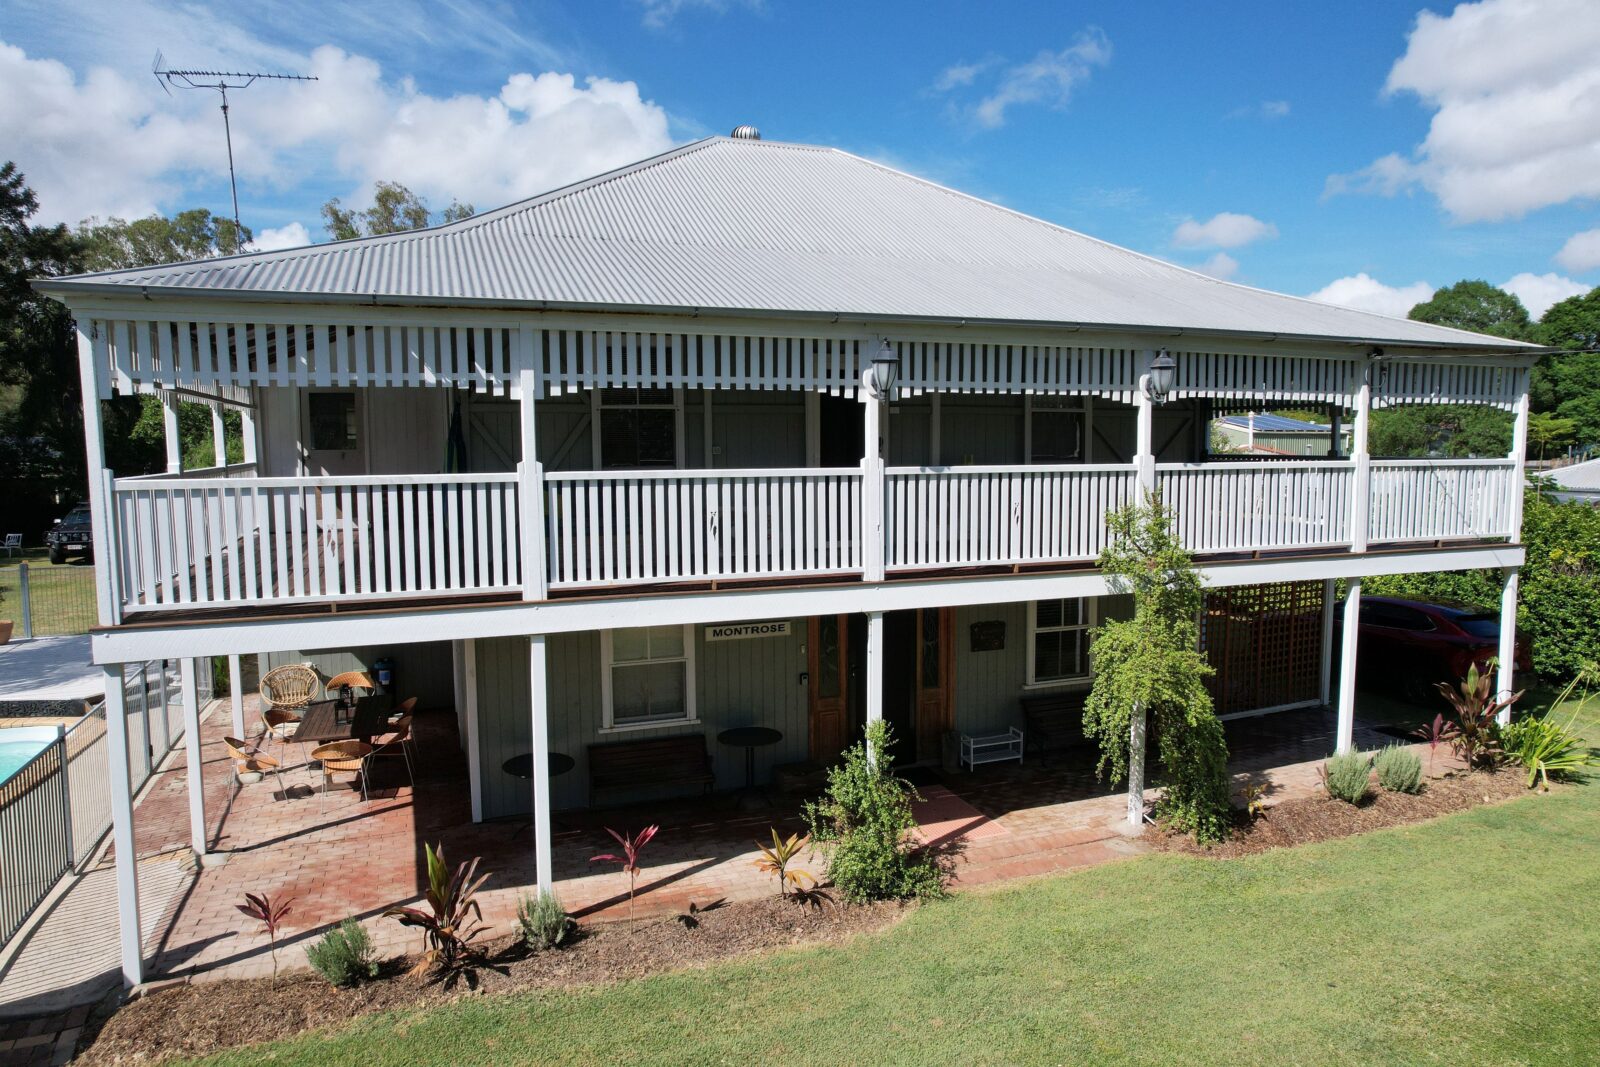 Montrose on Moore is a Queenslander style house open for accommodation